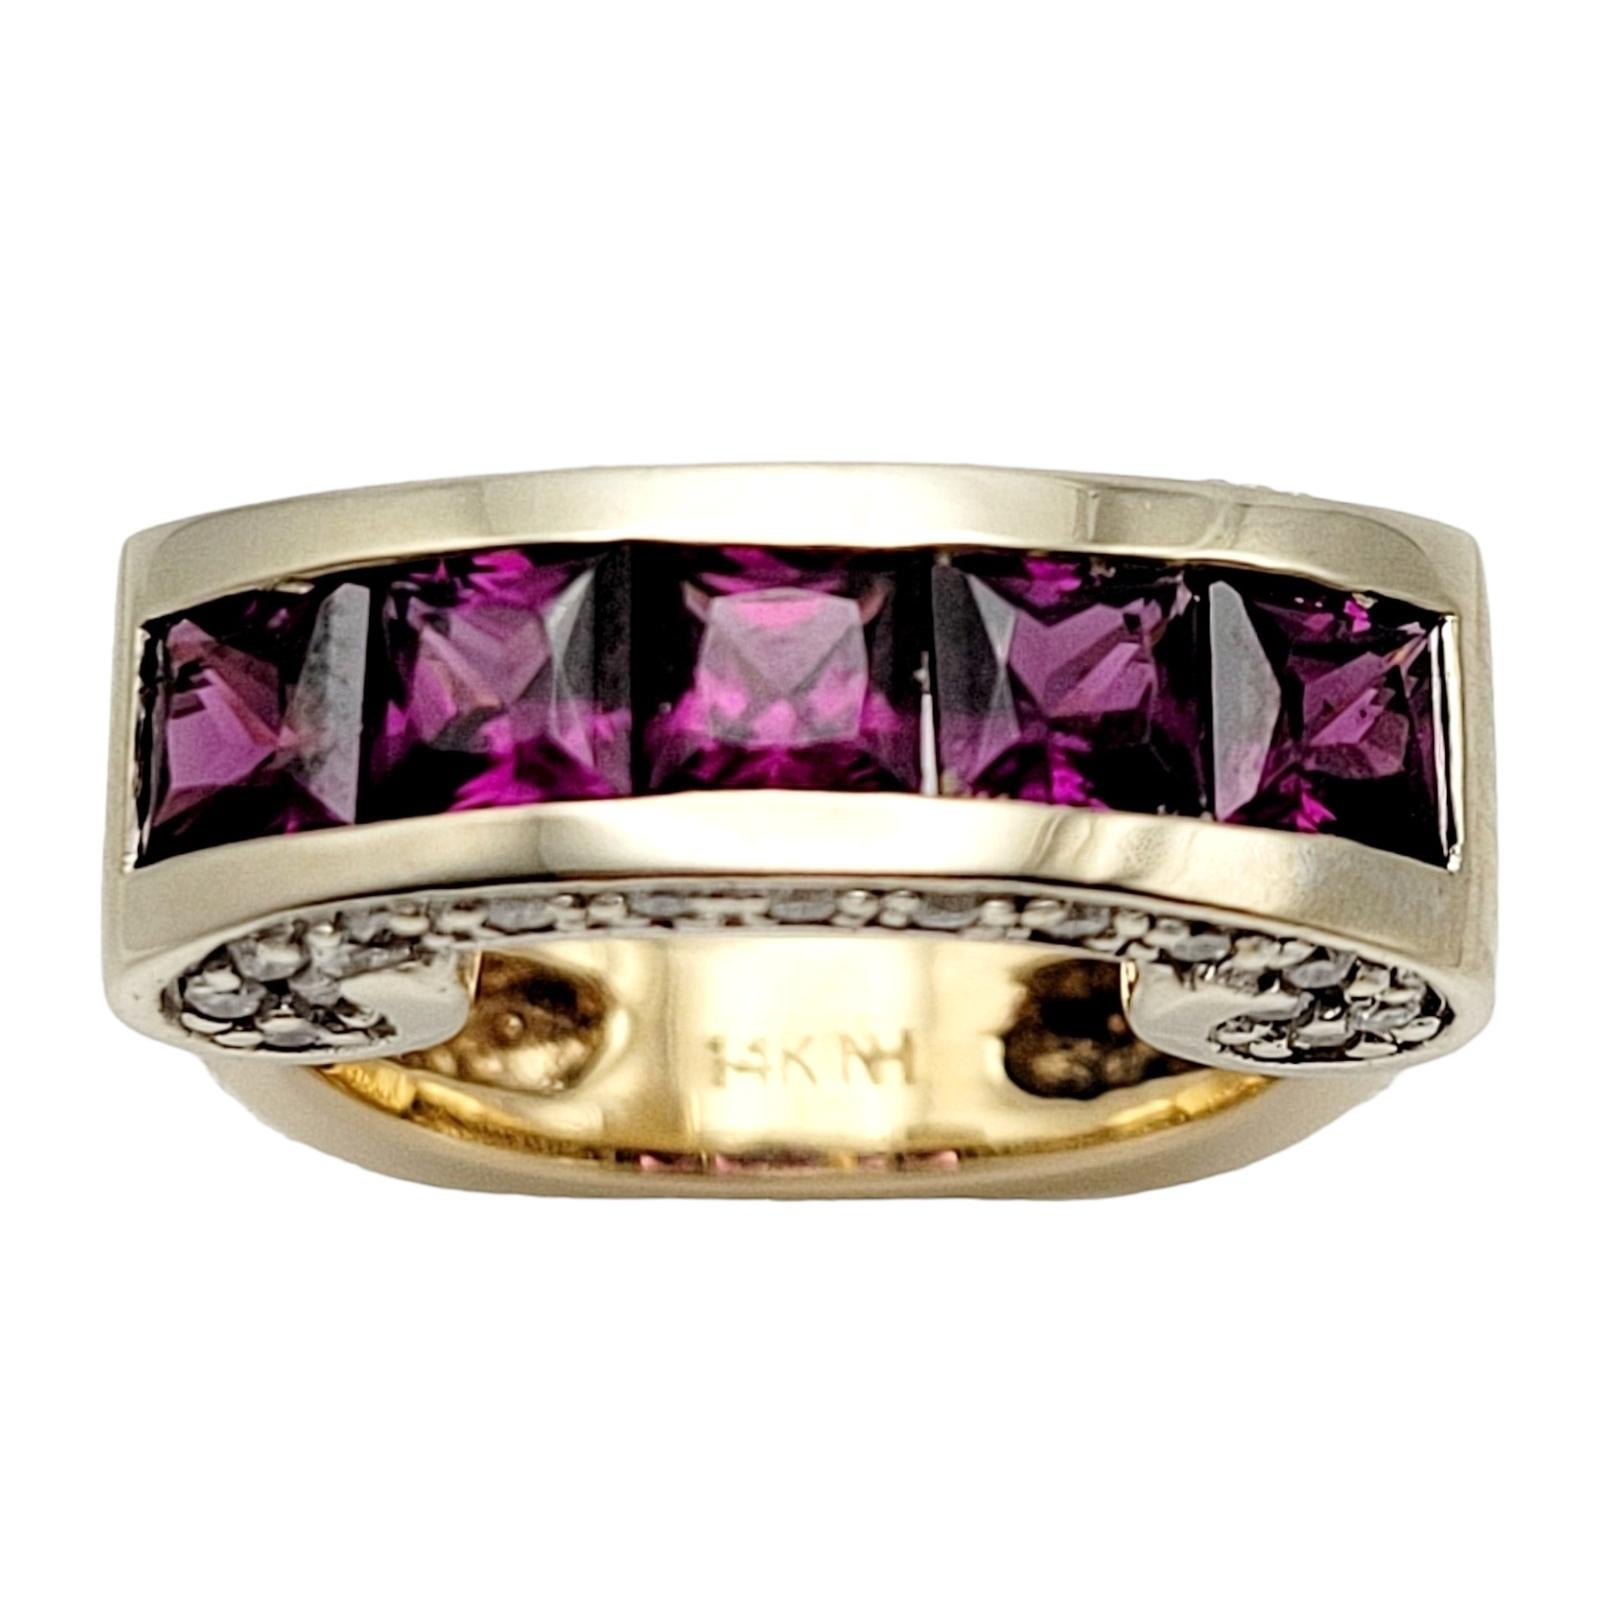 We absolutely adore this striking and elegant piece of fine jewelry- a  14 karat yellow gold rhodolite garnet and diamond ring. Meticulously crafted with attention to detail, this mesmerizing and unique piece is destined to be a cherished addition